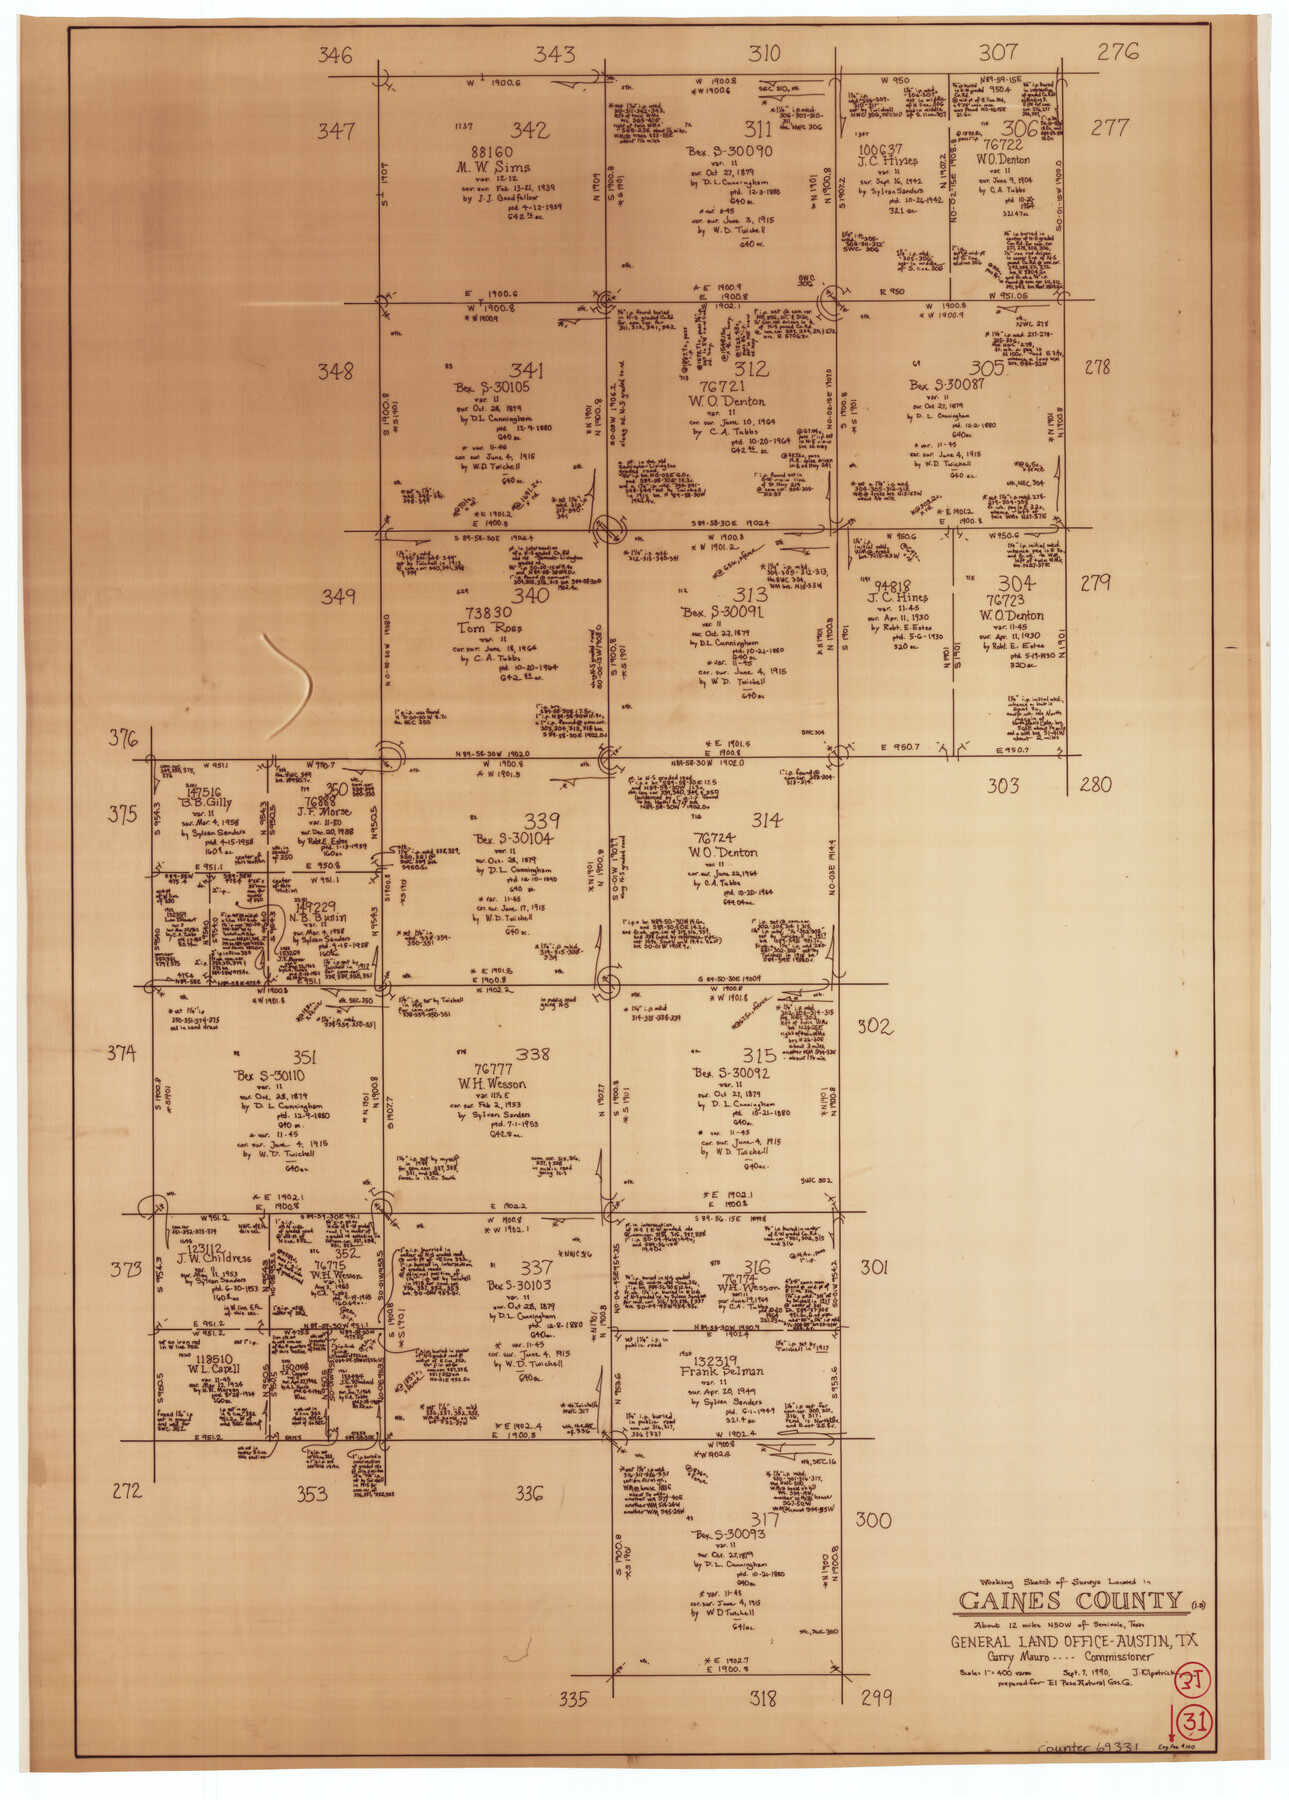 69331, Gaines County Working Sketch 31, General Map Collection